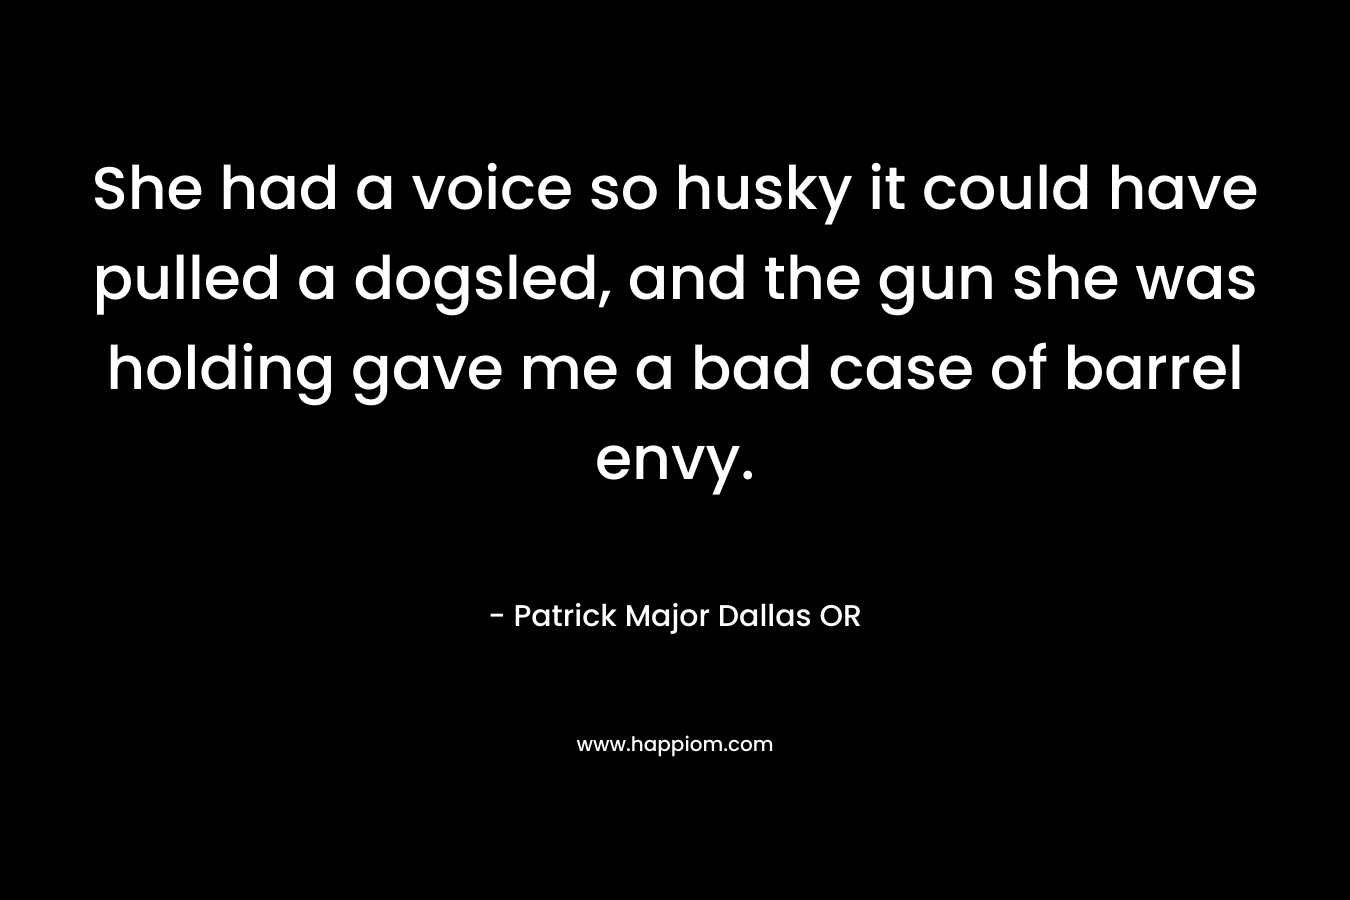 She had a voice so husky it could have pulled a dogsled, and the gun she was holding gave me a bad case of barrel envy.